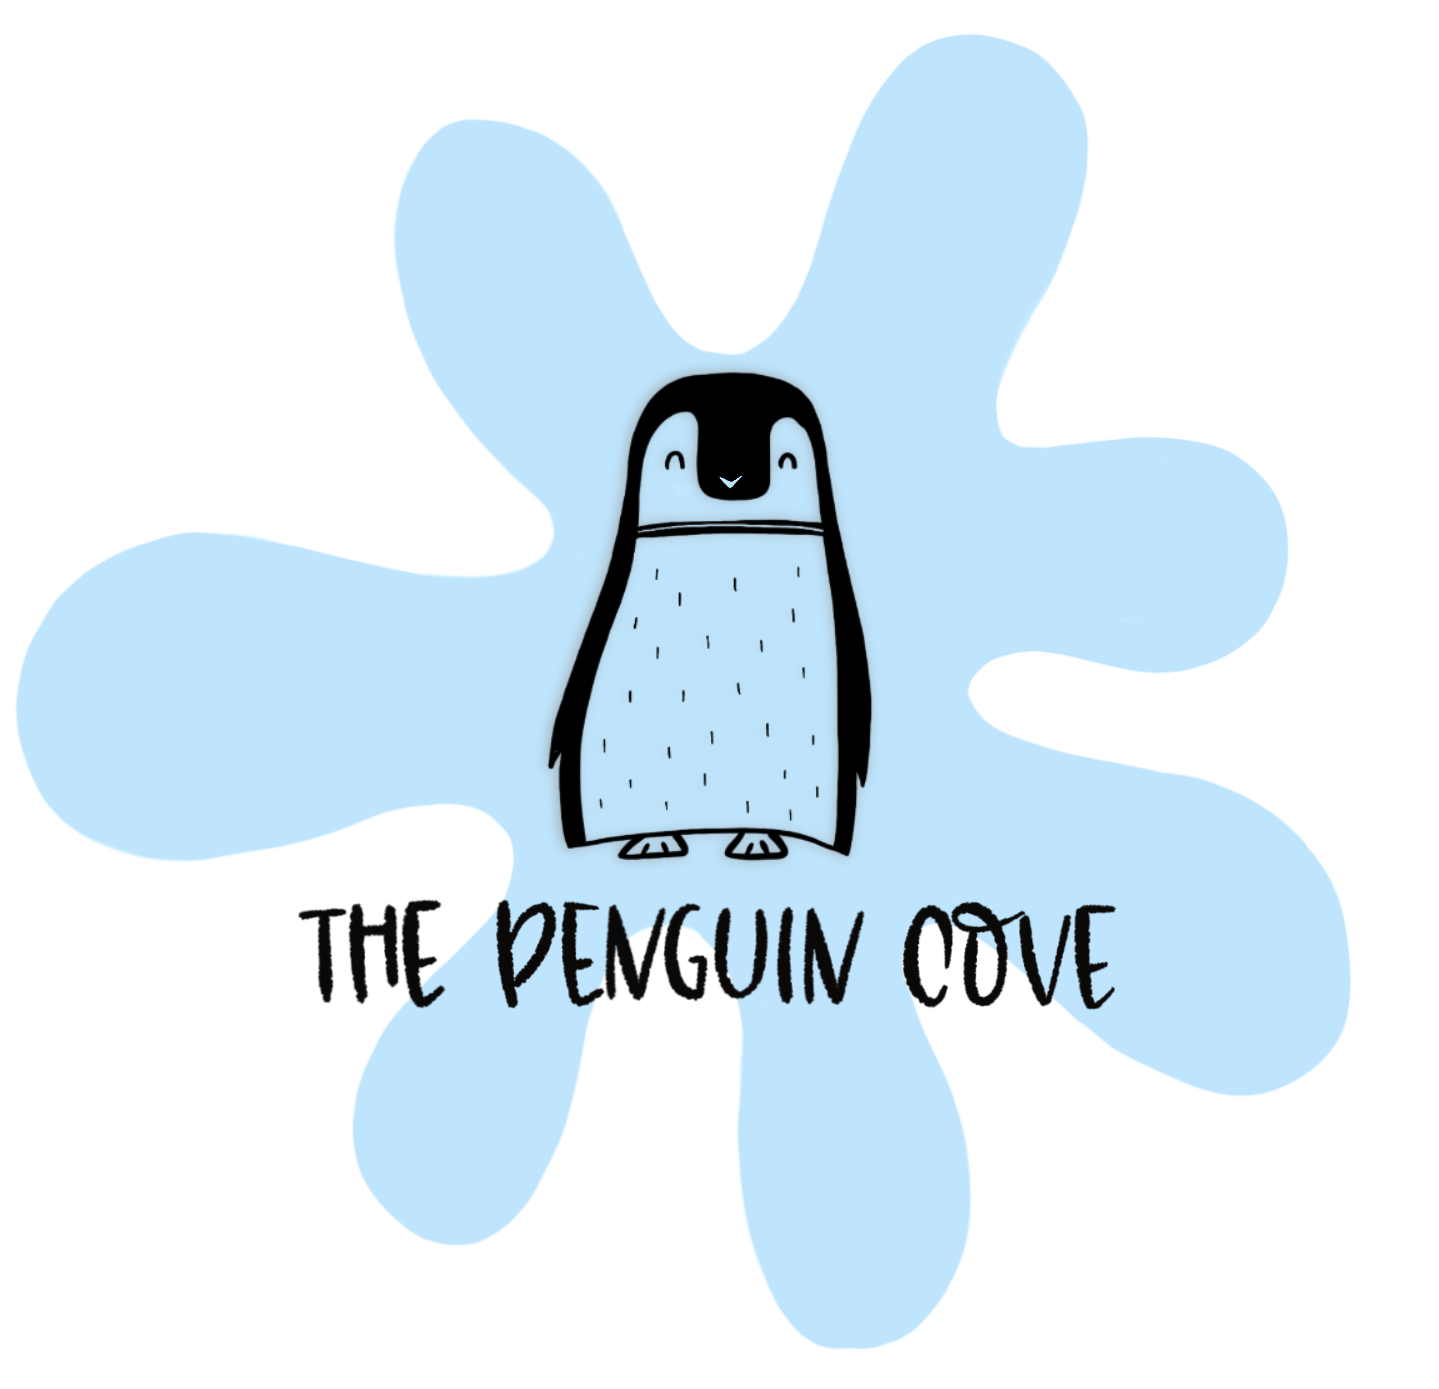 Smart Games and Smartmax – The Penguin Cove